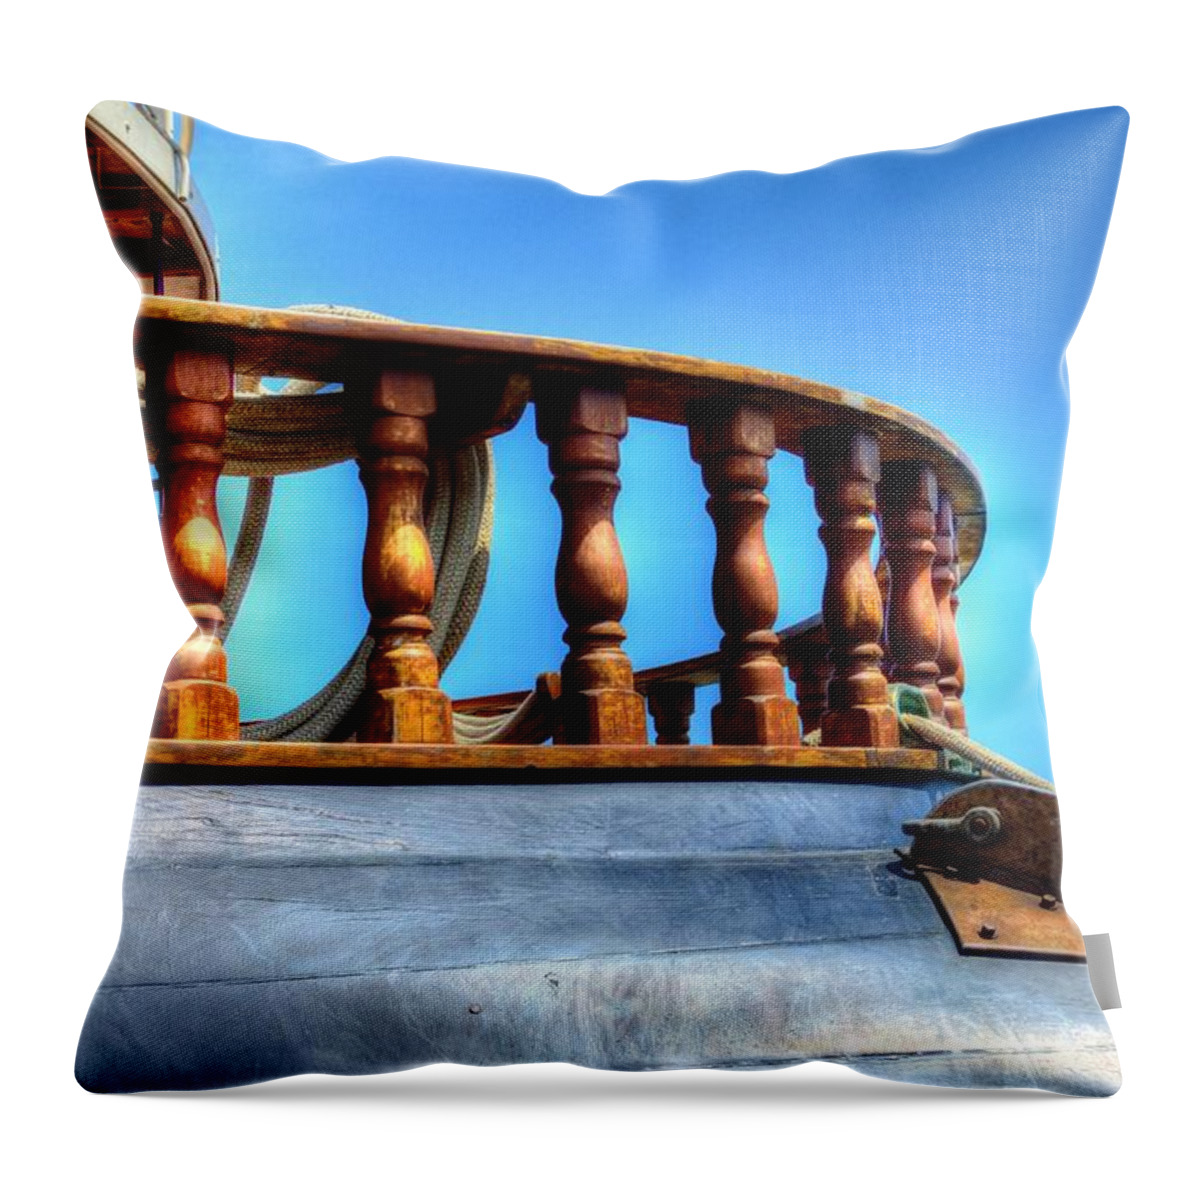 Peacemaker Throw Pillow featuring the photograph Peacemaker 2 by Deborah Ritch